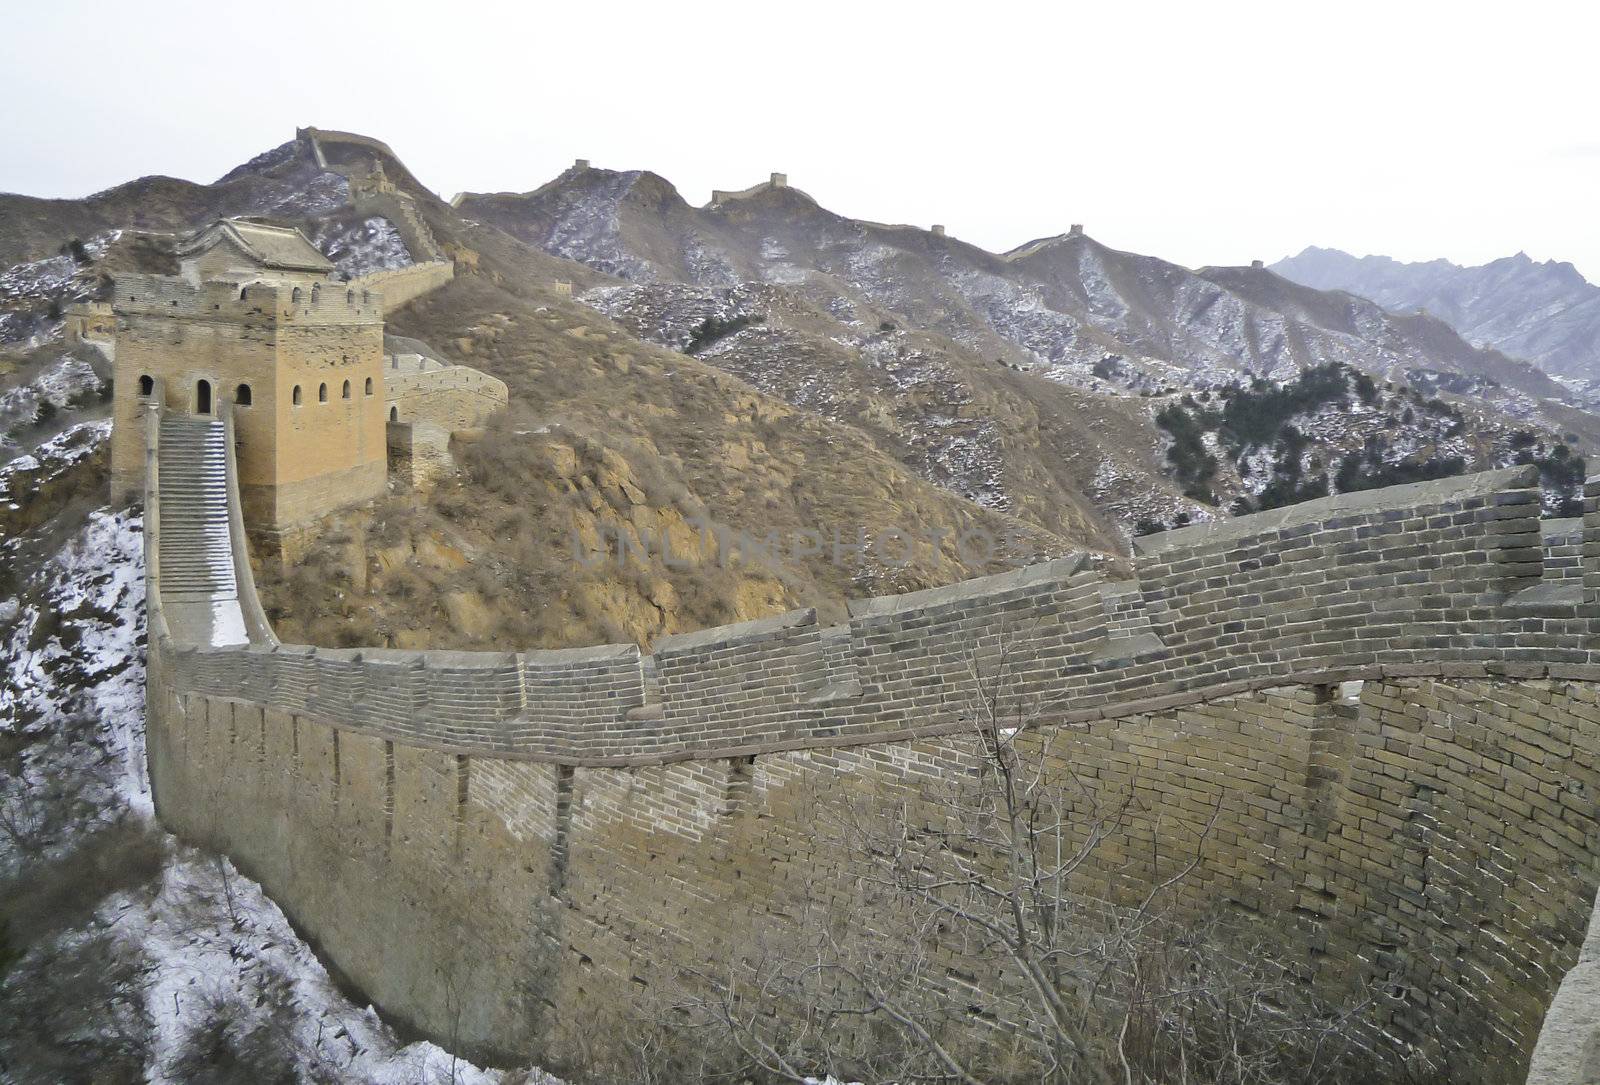 A section of the great wall of china on a cold winter day